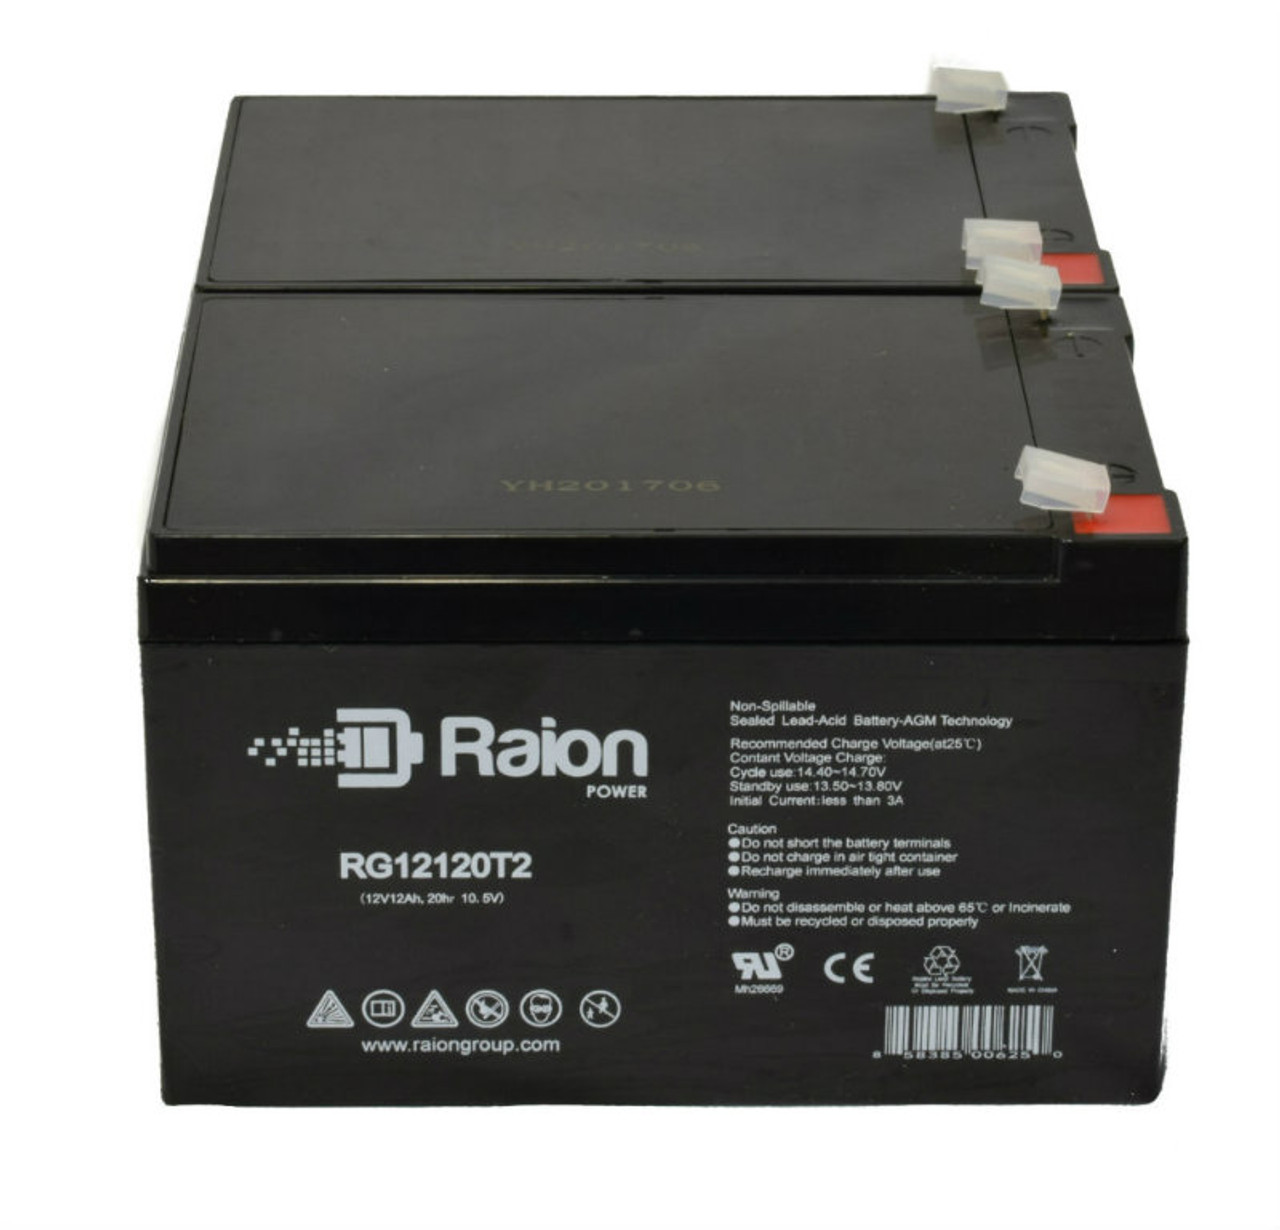 Raion Power 12V 12Ah Non-Spillable Compatible Replacement Battery for Weida HX12-12 - (2 Pack)